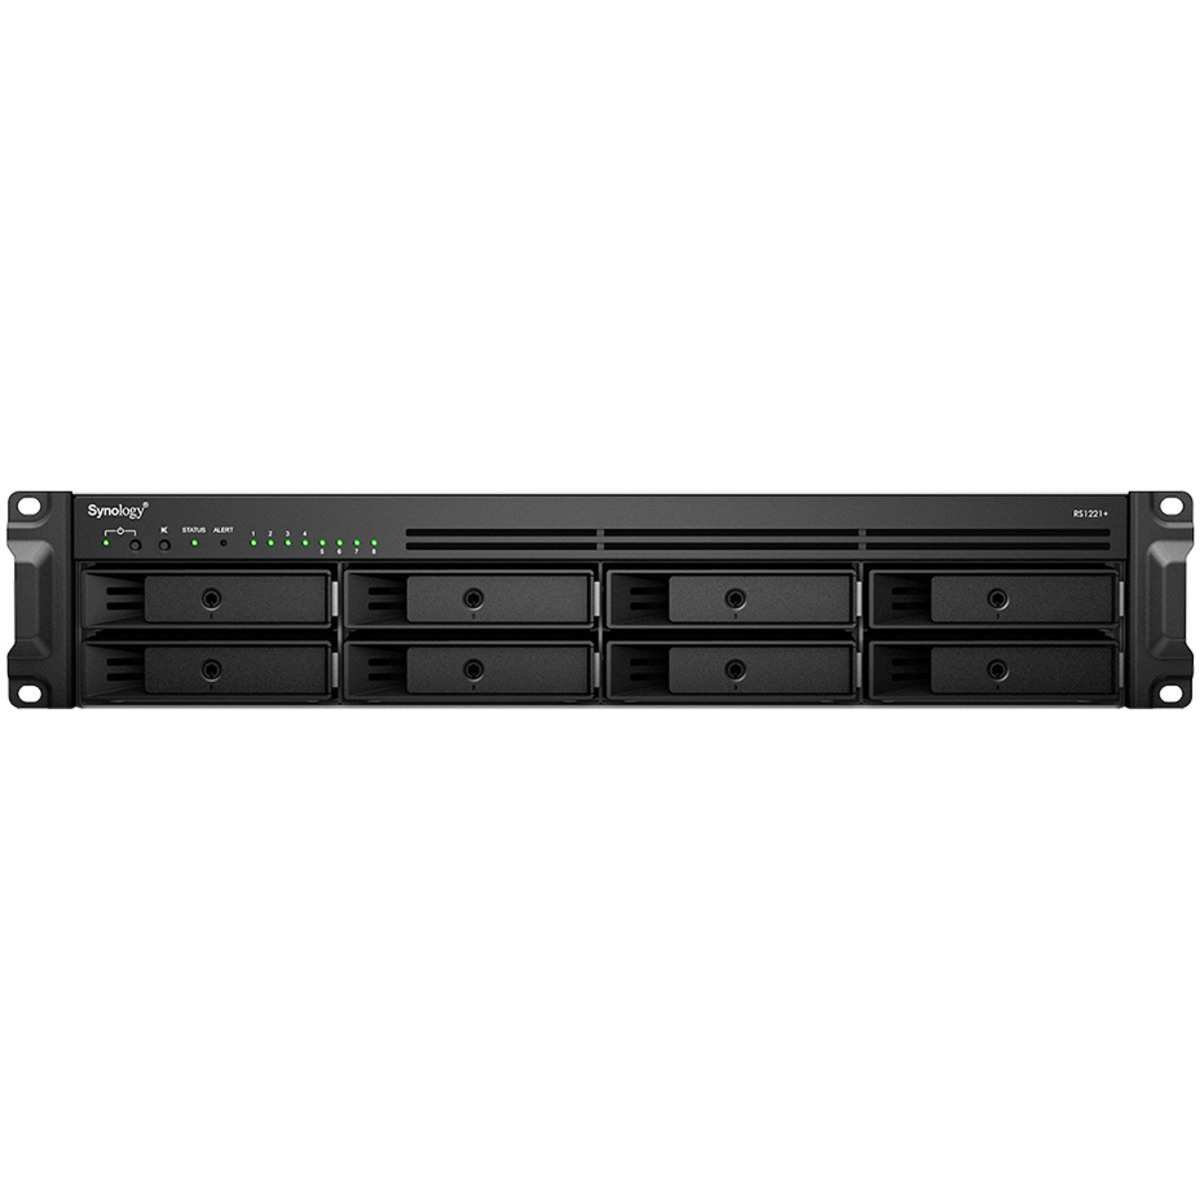 Synology RackStation RS1221RP+ 14tb 8-Bay RackMount Multimedia / Power User / Business NAS - Network Attached Storage Device 7x2tb Sandisk Ultra 3D SDSSDH3-2T00 2.5 560/520MB/s SATA 6Gb/s SSD CONSUMER Class Drives Installed - Burn-In Tested - FREE RAM UPGRADE RackStation RS1221RP+